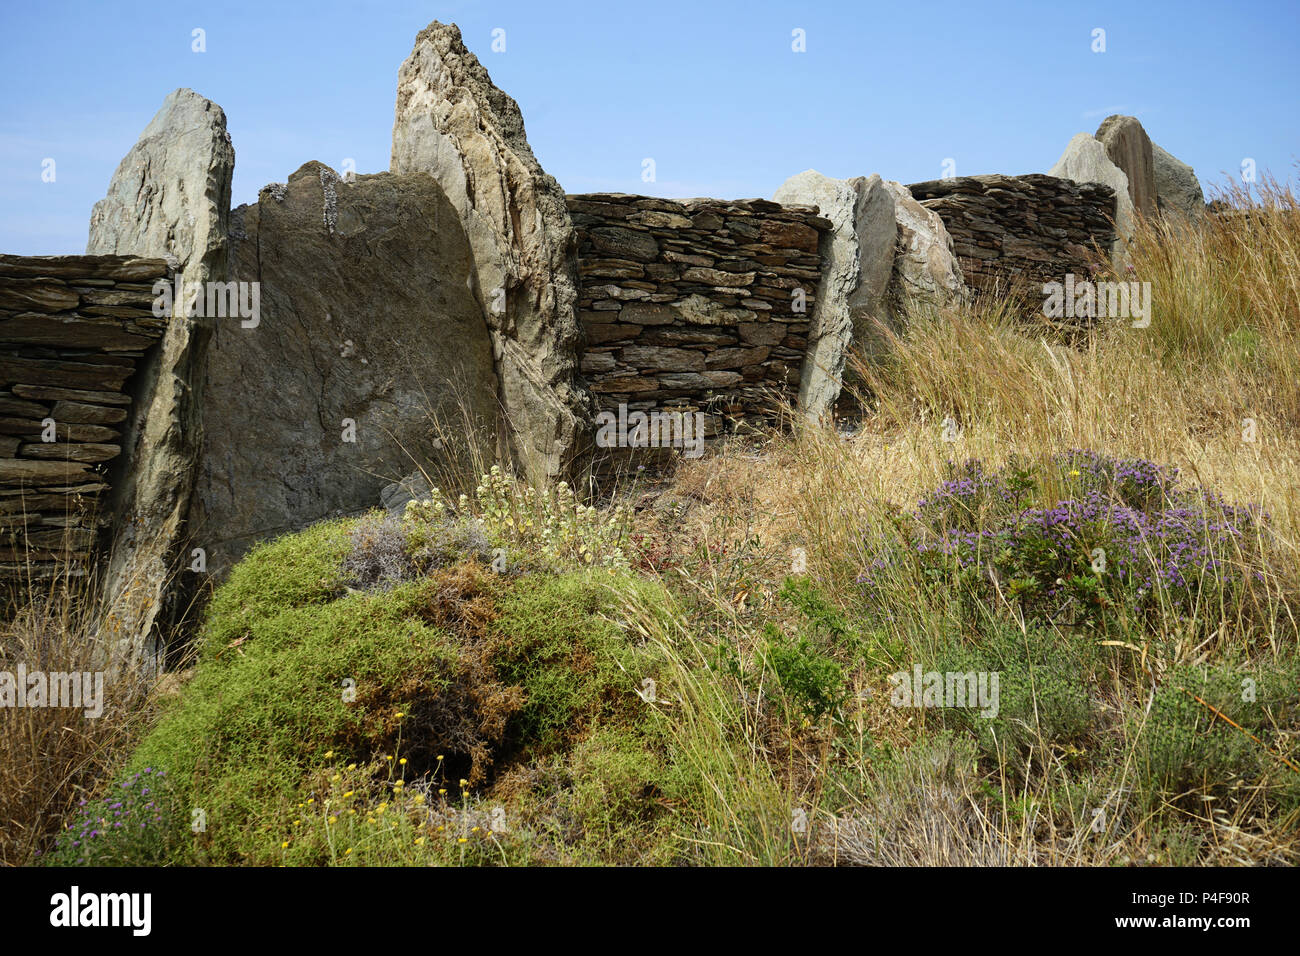 Rock wall sith large rocks separating fields, island Andros, Cyclades, Greece Stock Photo